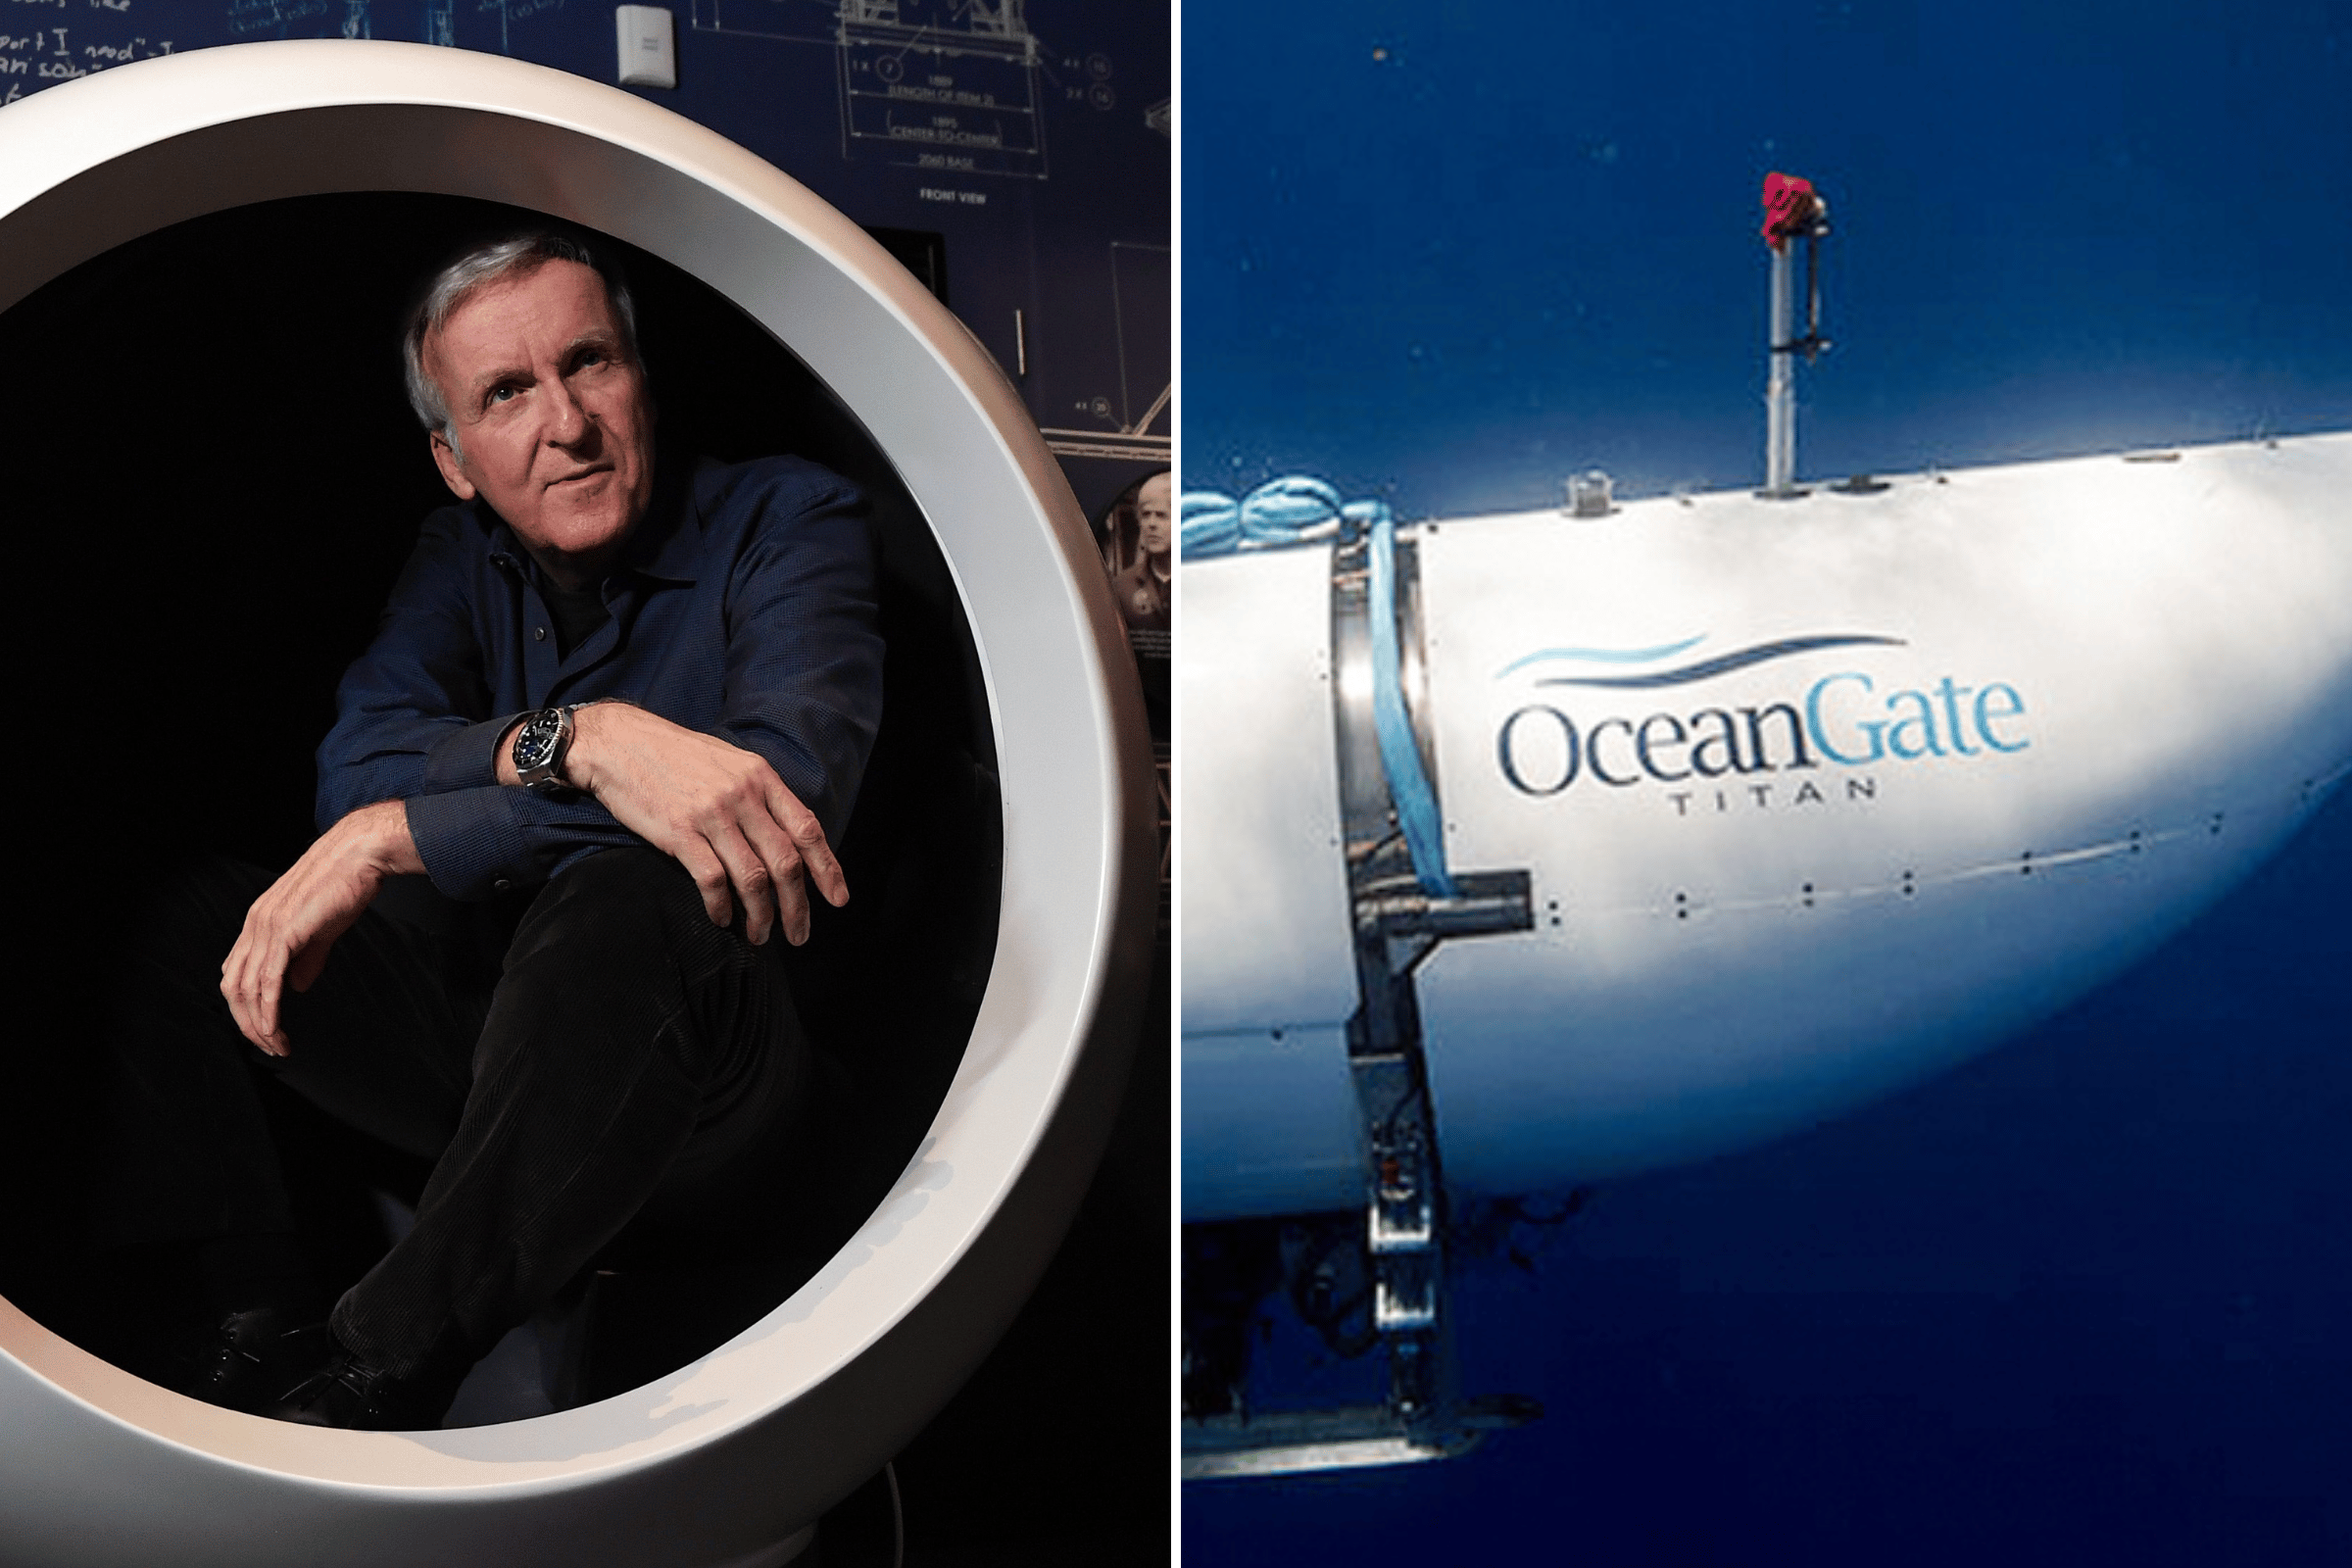 How James Cameron’s submersible compares to OceanGate’s Titan